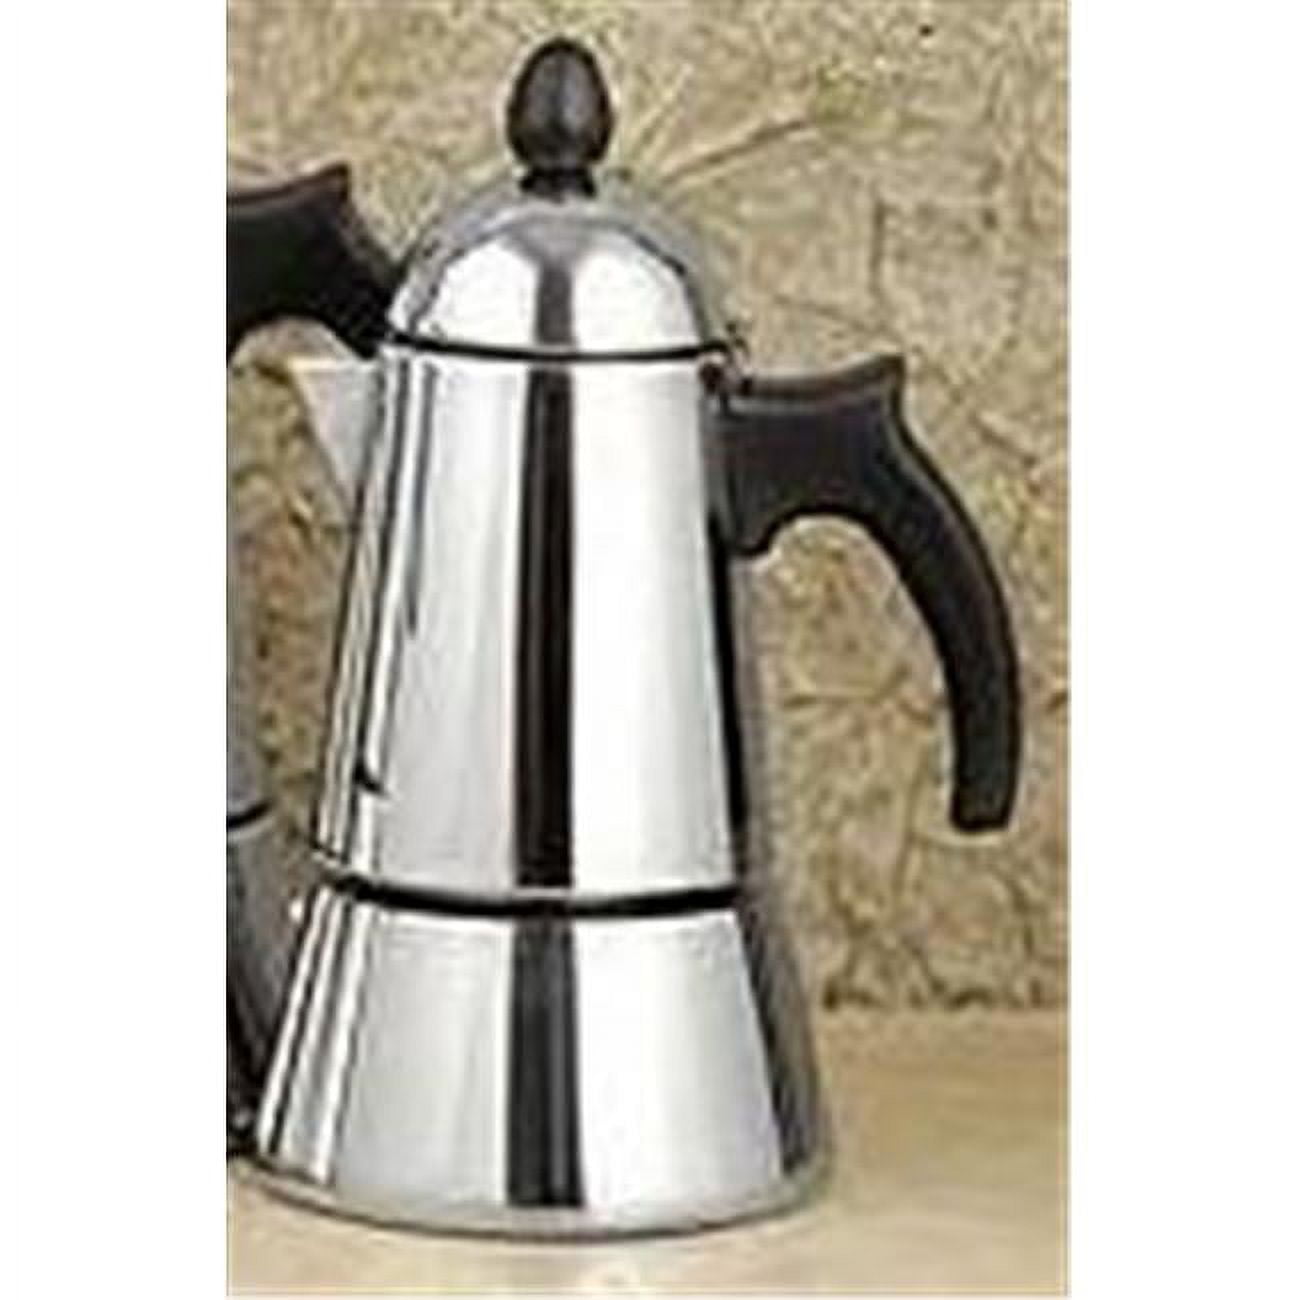 Stainless Steel Italian Espresso Coffee Pot for Induction Vitro